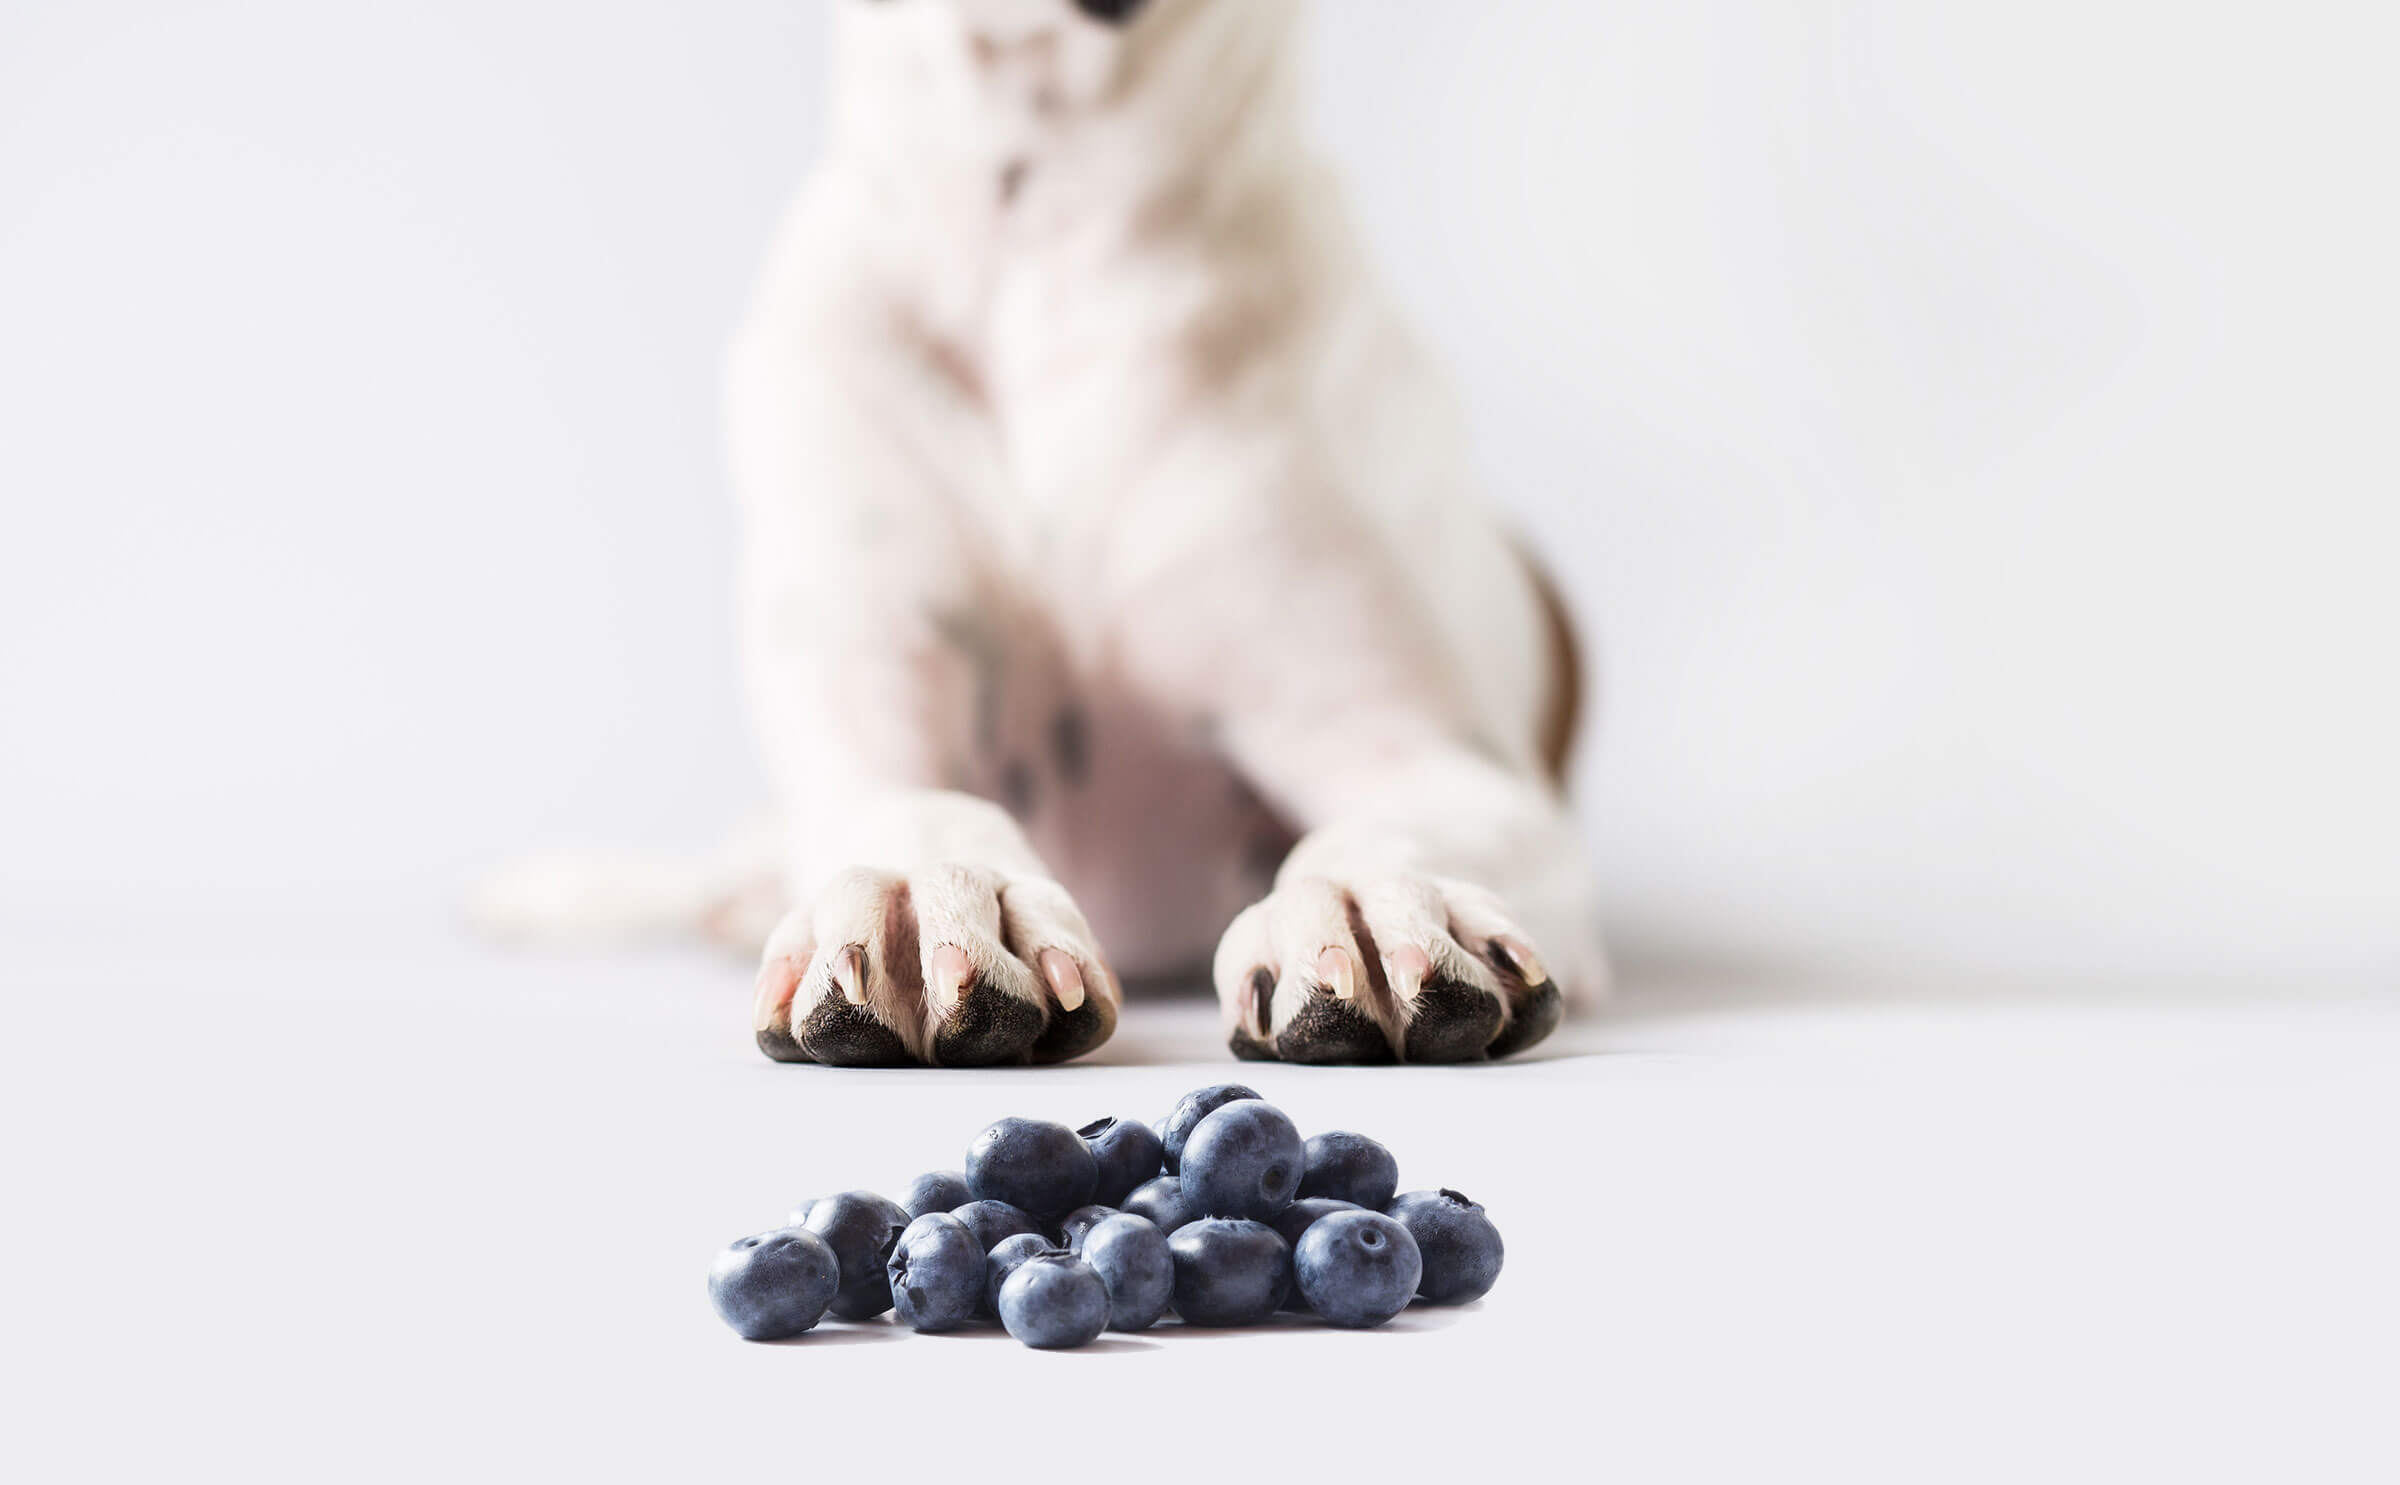 Dogs and Blueberries: The Good, Bad and the Berry